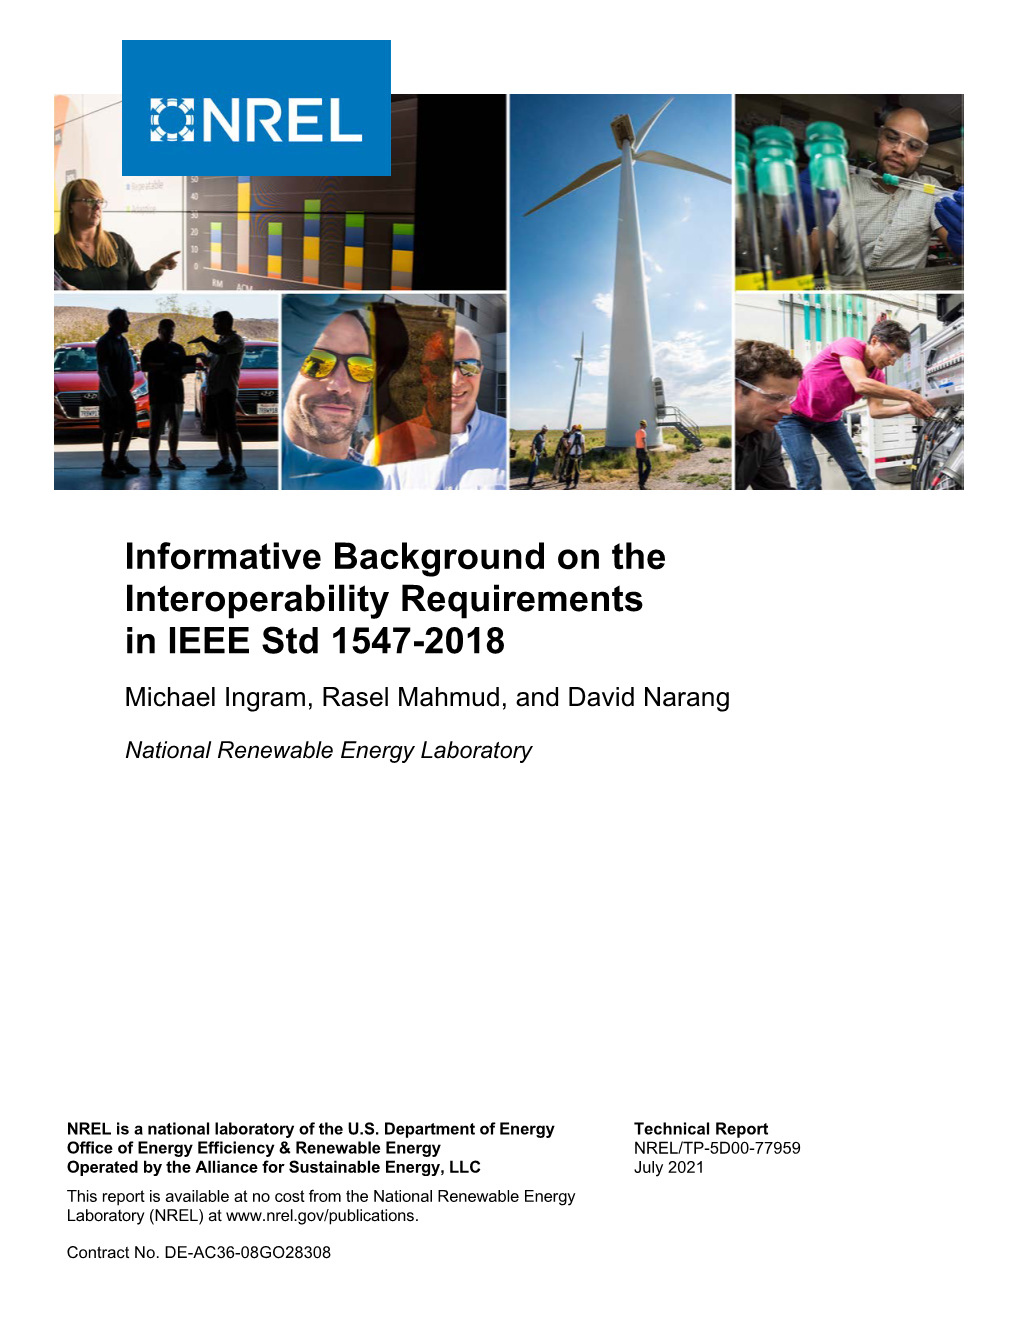 Informative Background on the Interoperability Requirements in IEEE Std 1547-2018 Michael Ingram, Rasel Mahmud, and David Narang